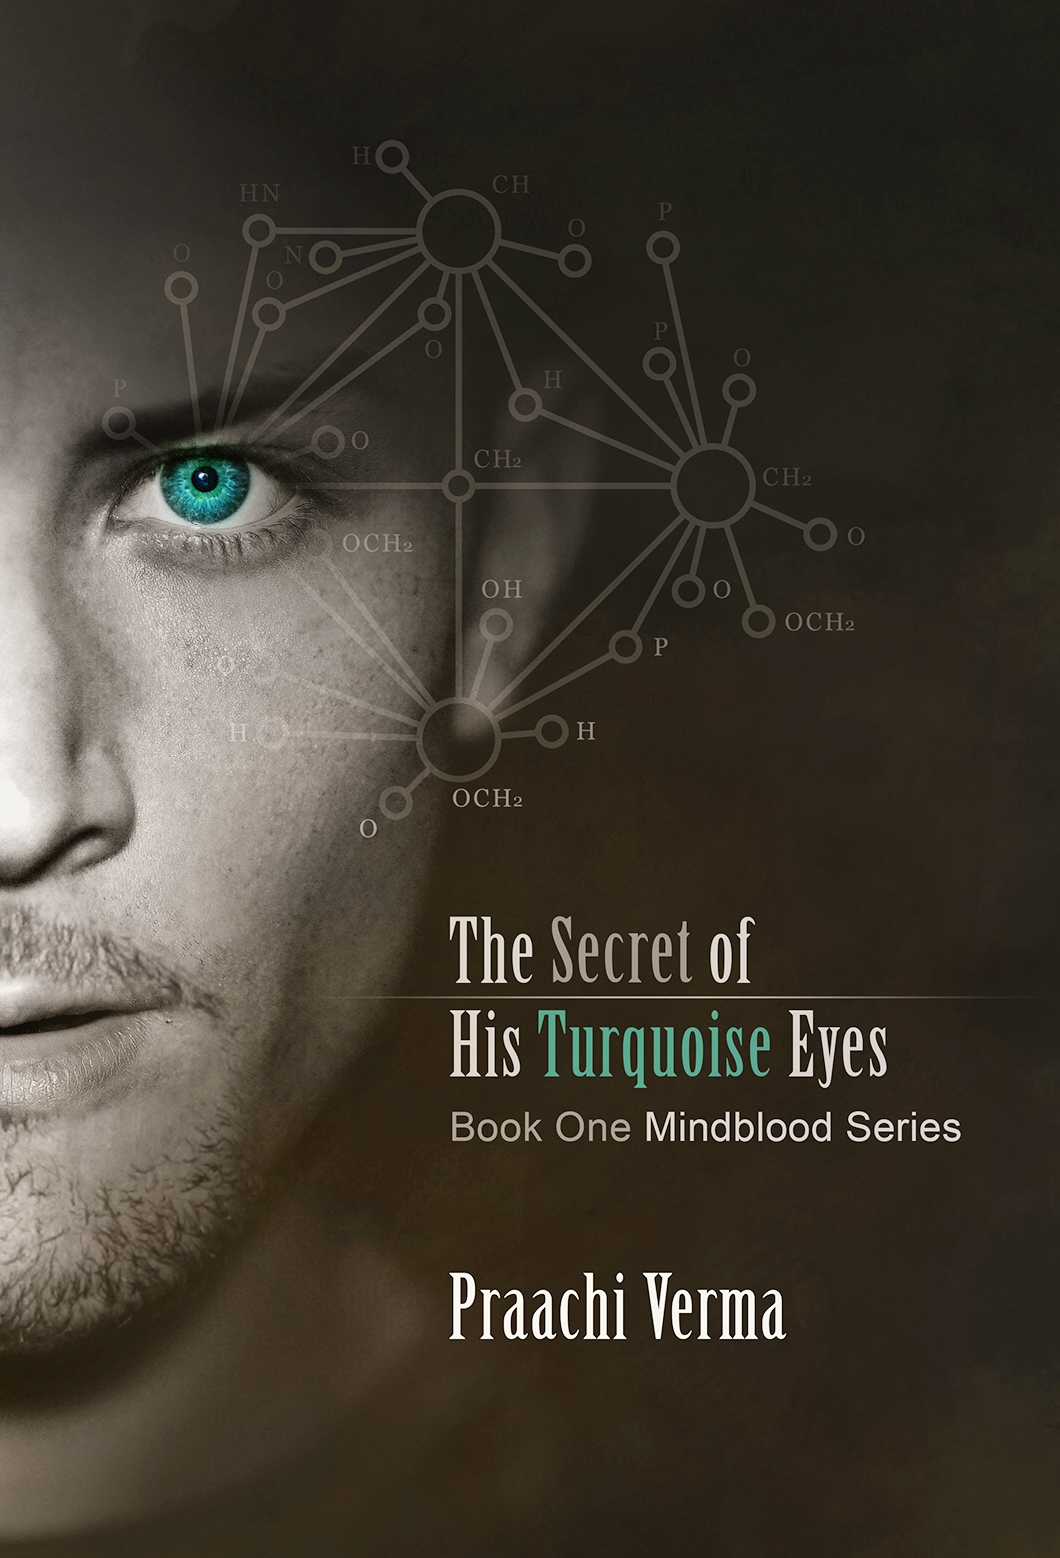 FREE: The Secret of His Turquoise Eyes by Praachi Verma